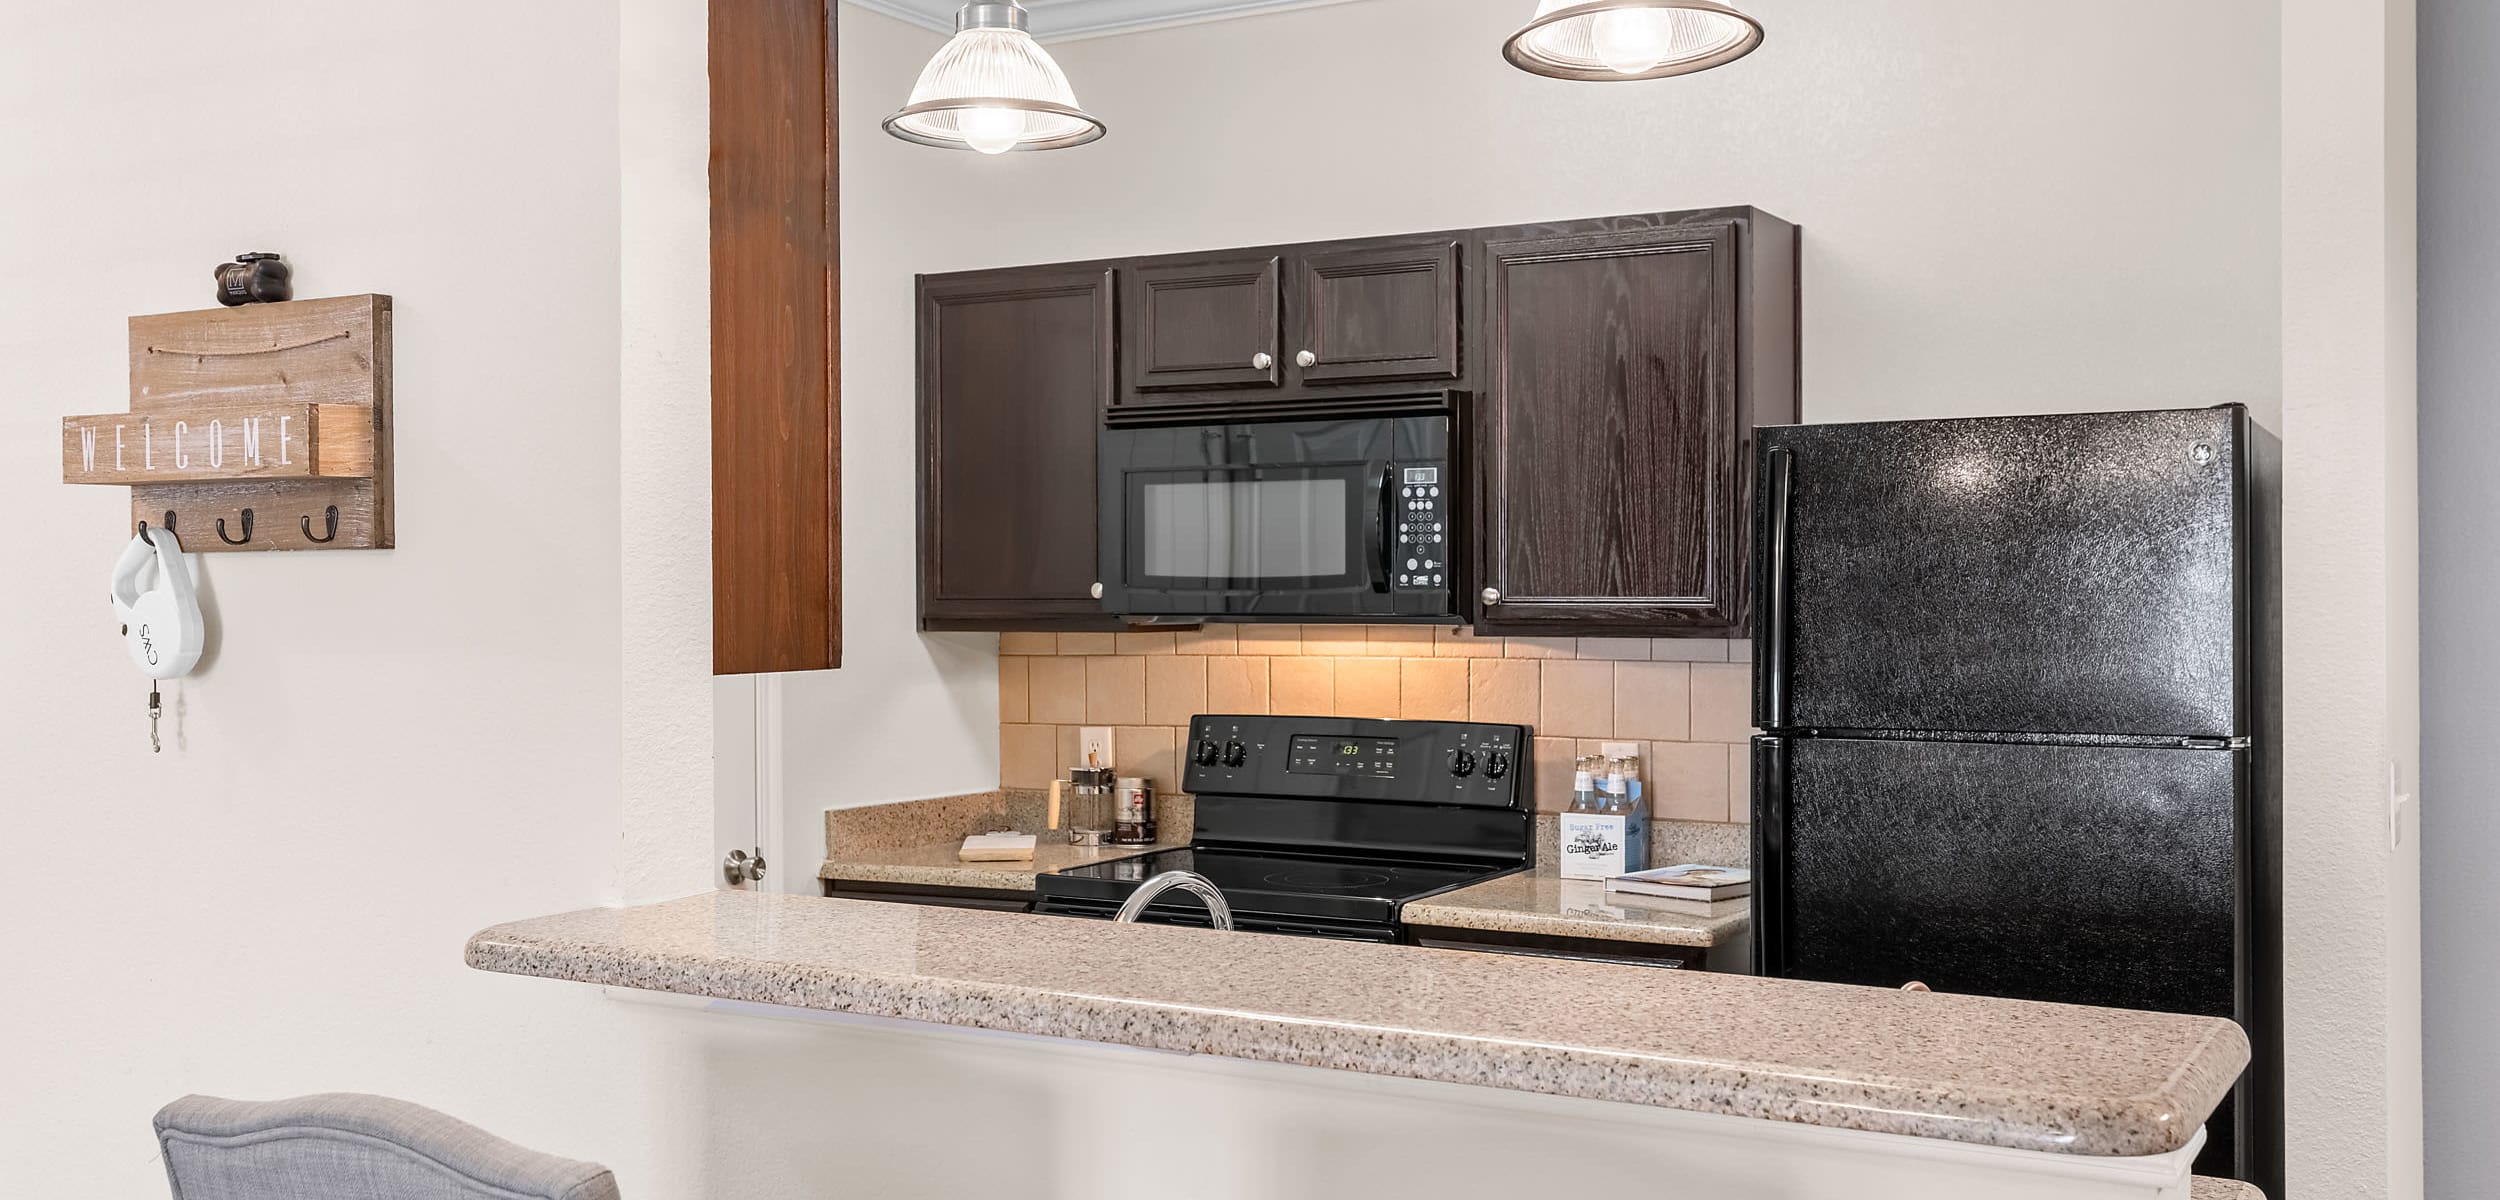 Modern kitchen with black appliances at Marquis at The RIM in San Antonio, Texas